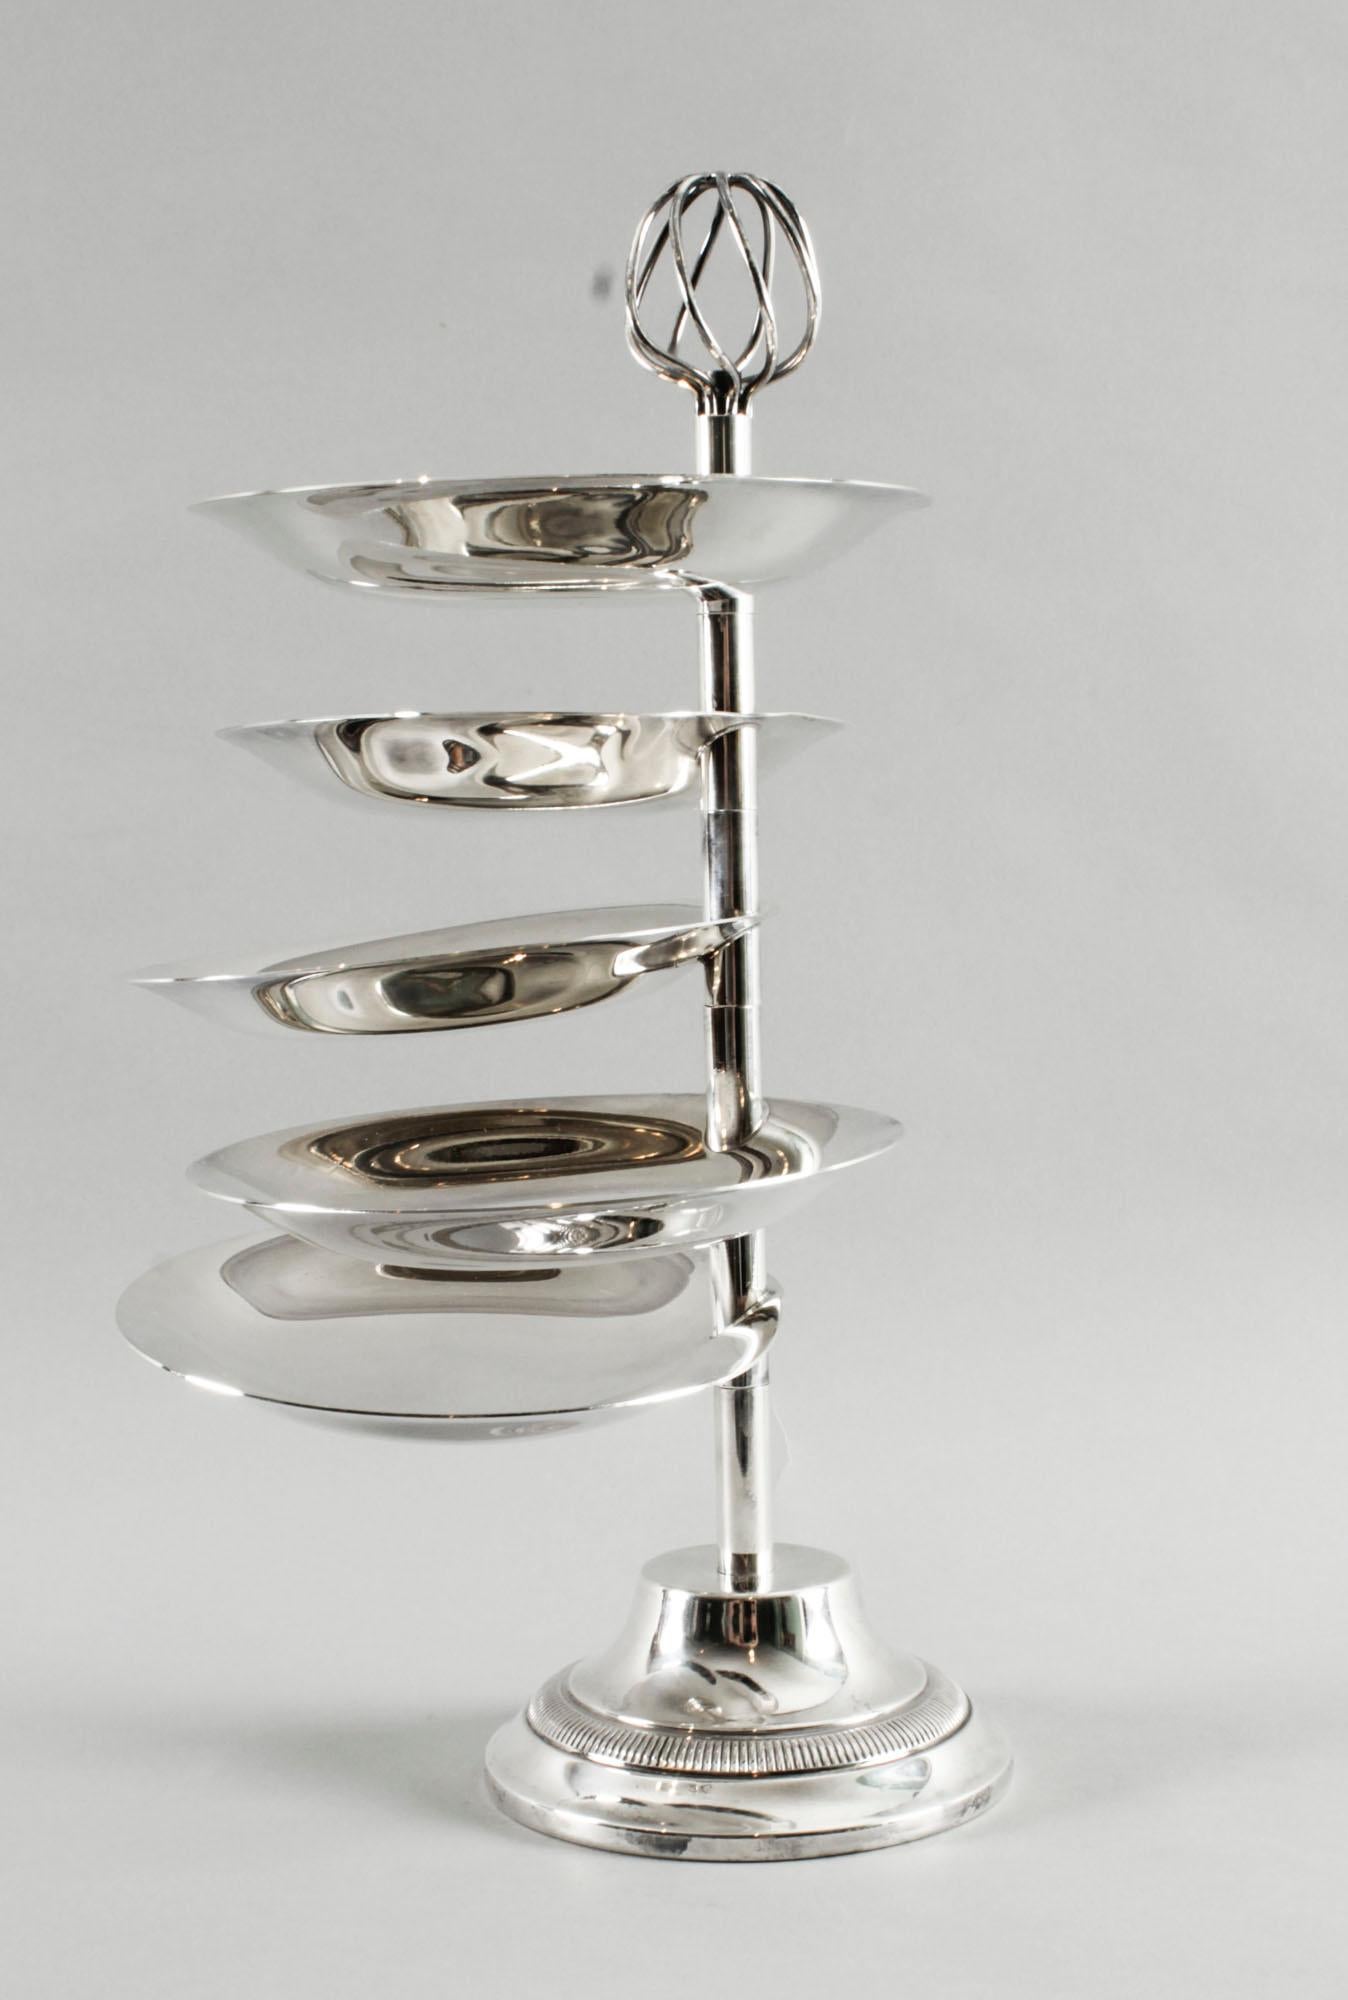 Antique Silver Plated Hors d'oeuvres Stand by Christofle 19th C. en vente 1